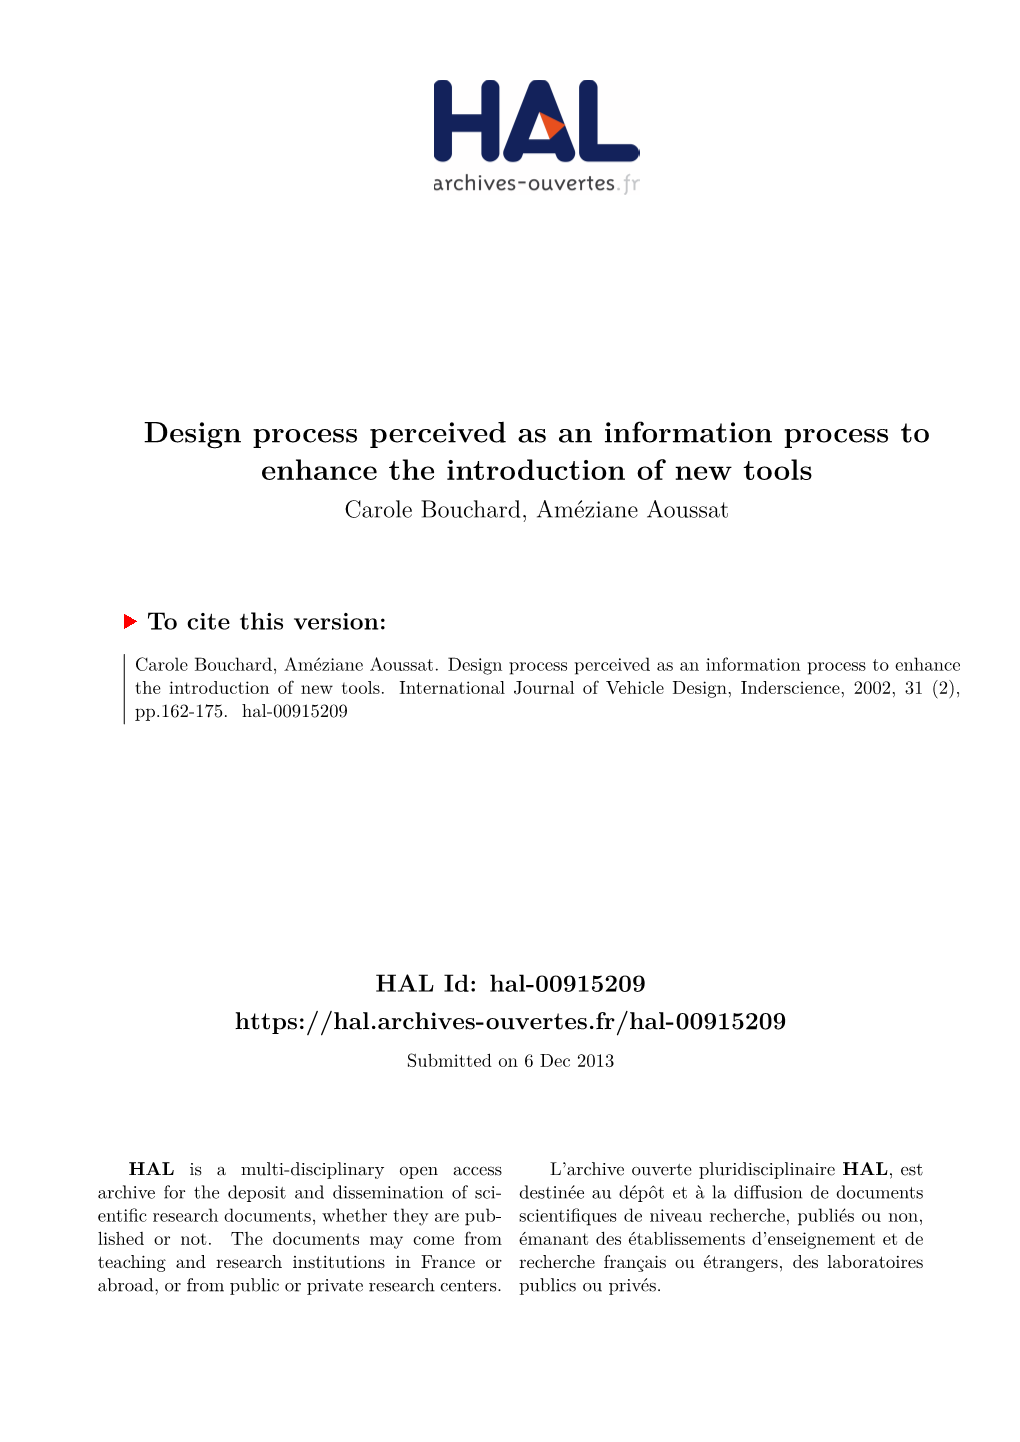 Design Process Perceived As an Information Process to Enhance the Introduction of New Tools Carole Bouchard, Améziane Aoussat